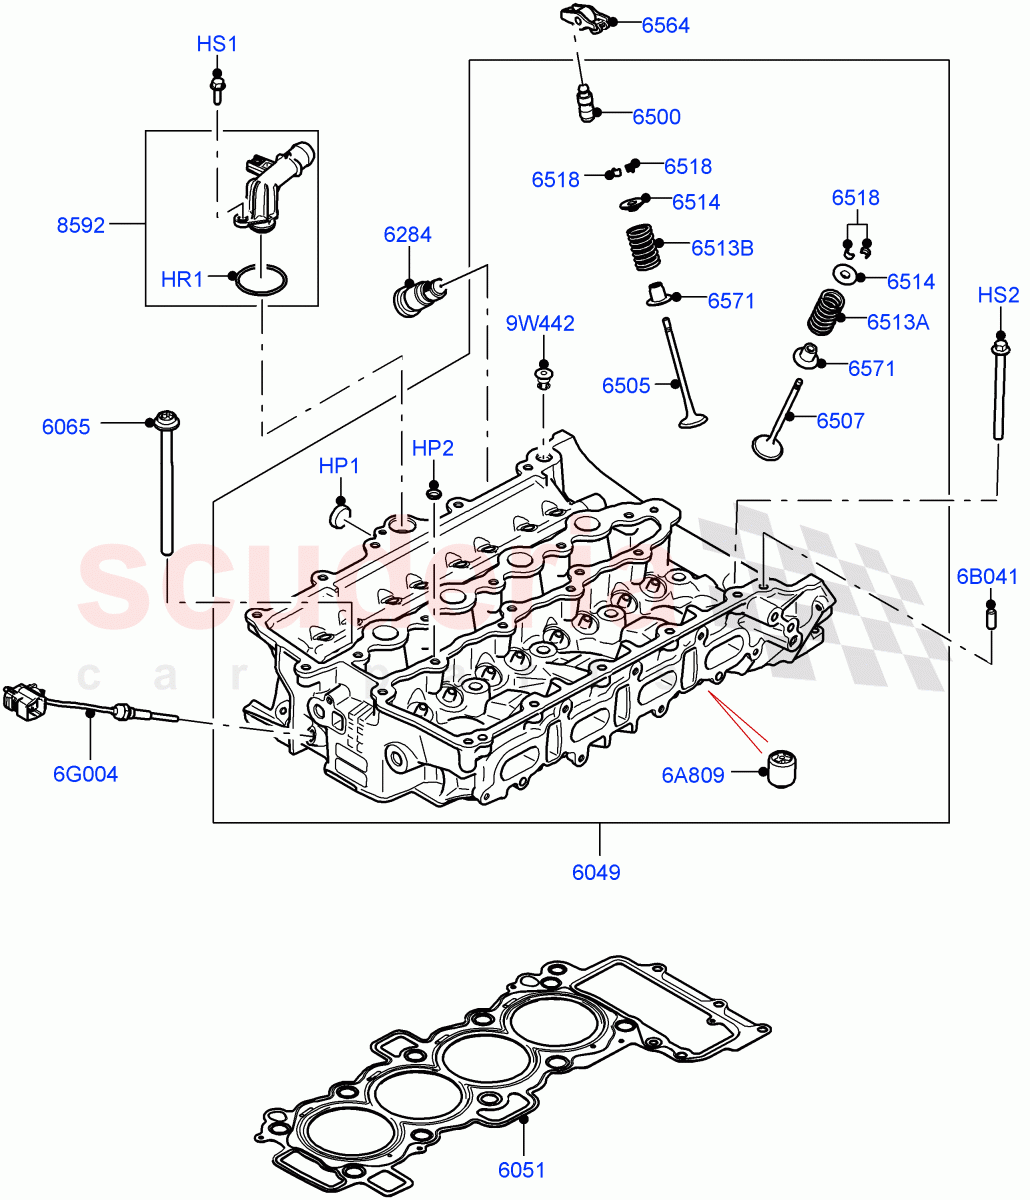 Cylinder Head(Solihull Plant Build)(2.0L I4 Mid DOHC AJ200 Petrol,2.0L I4 High DOHC AJ200 Petrol,2.0L AJ200P Hi PHEV)((V)FROMHA000001) of Land Rover Land Rover Discovery 5 (2017+) [2.0 Turbo Petrol AJ200P]